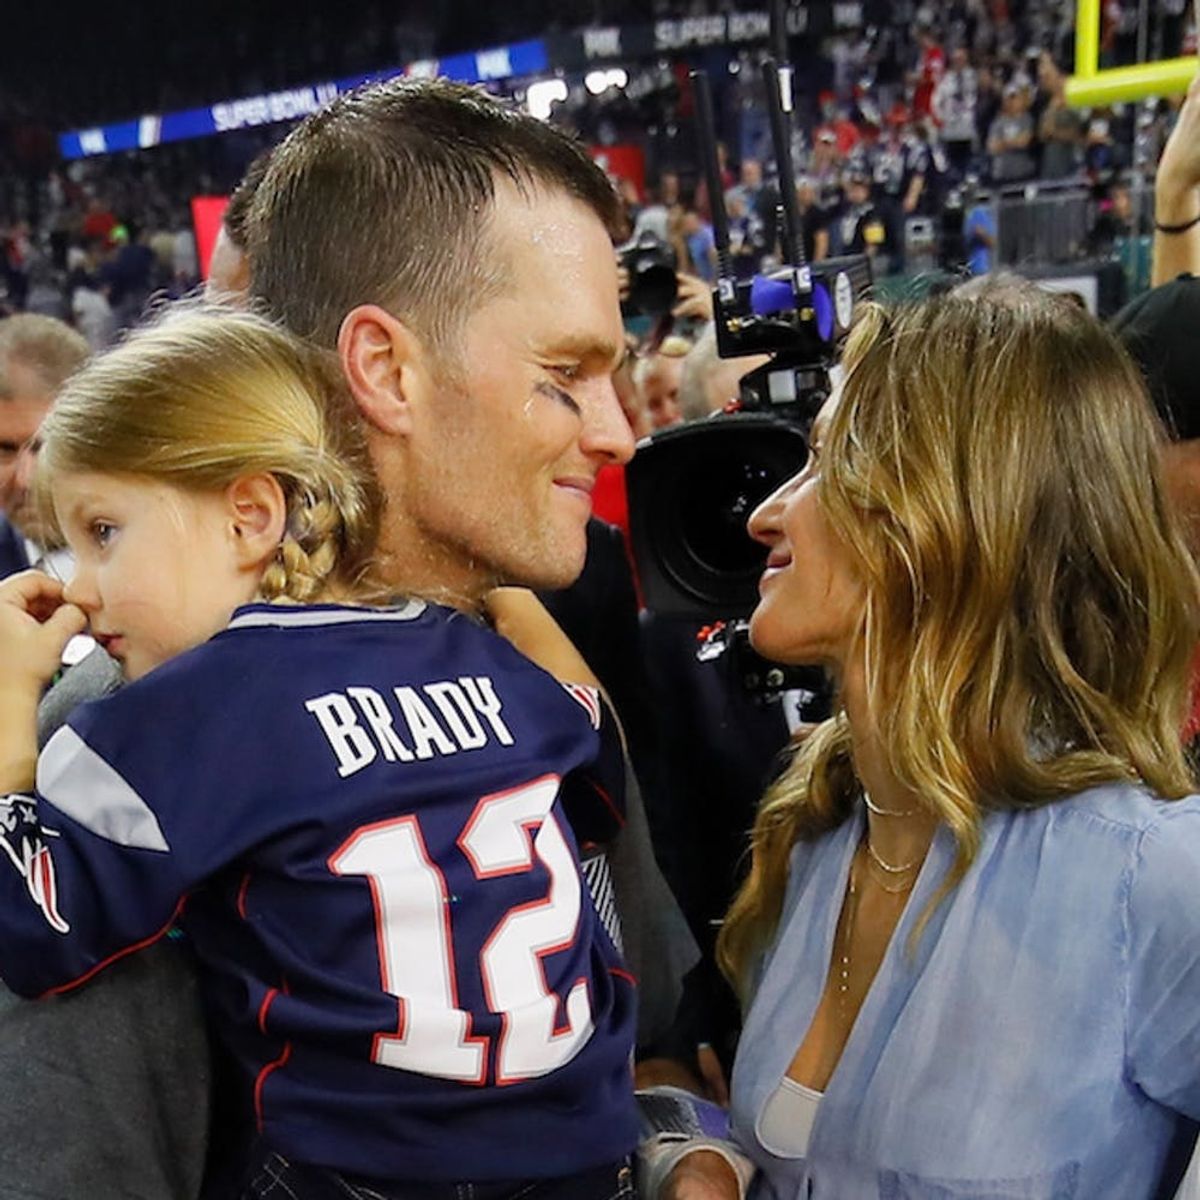 Morning Buzz! This Clip of Gisele Losing Her Mind When the Patriots Won Sums Up the Super Bowl + More